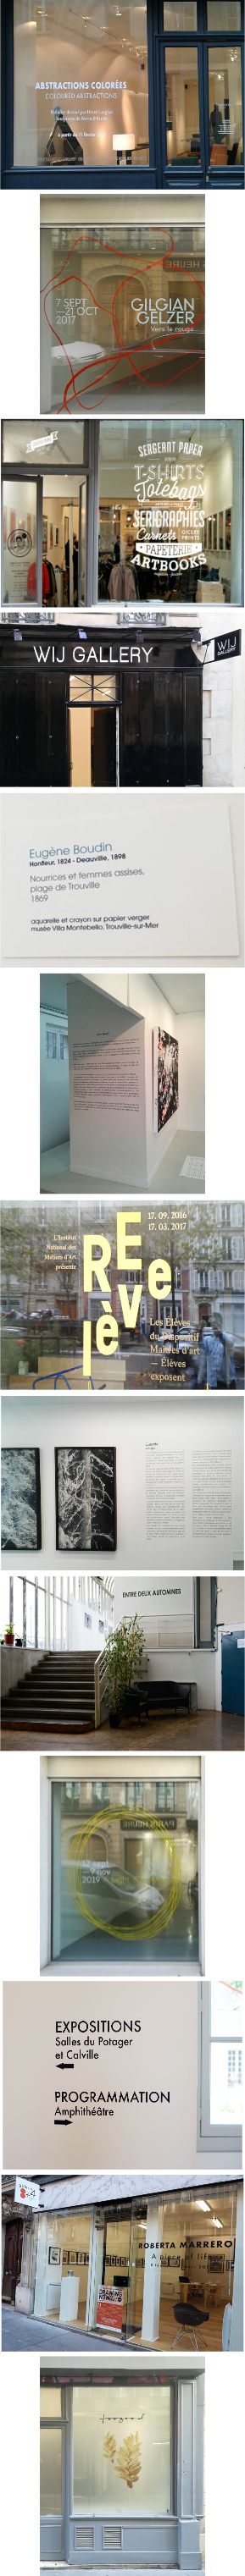 lettres-adhesives-galeries-expositions.jpg